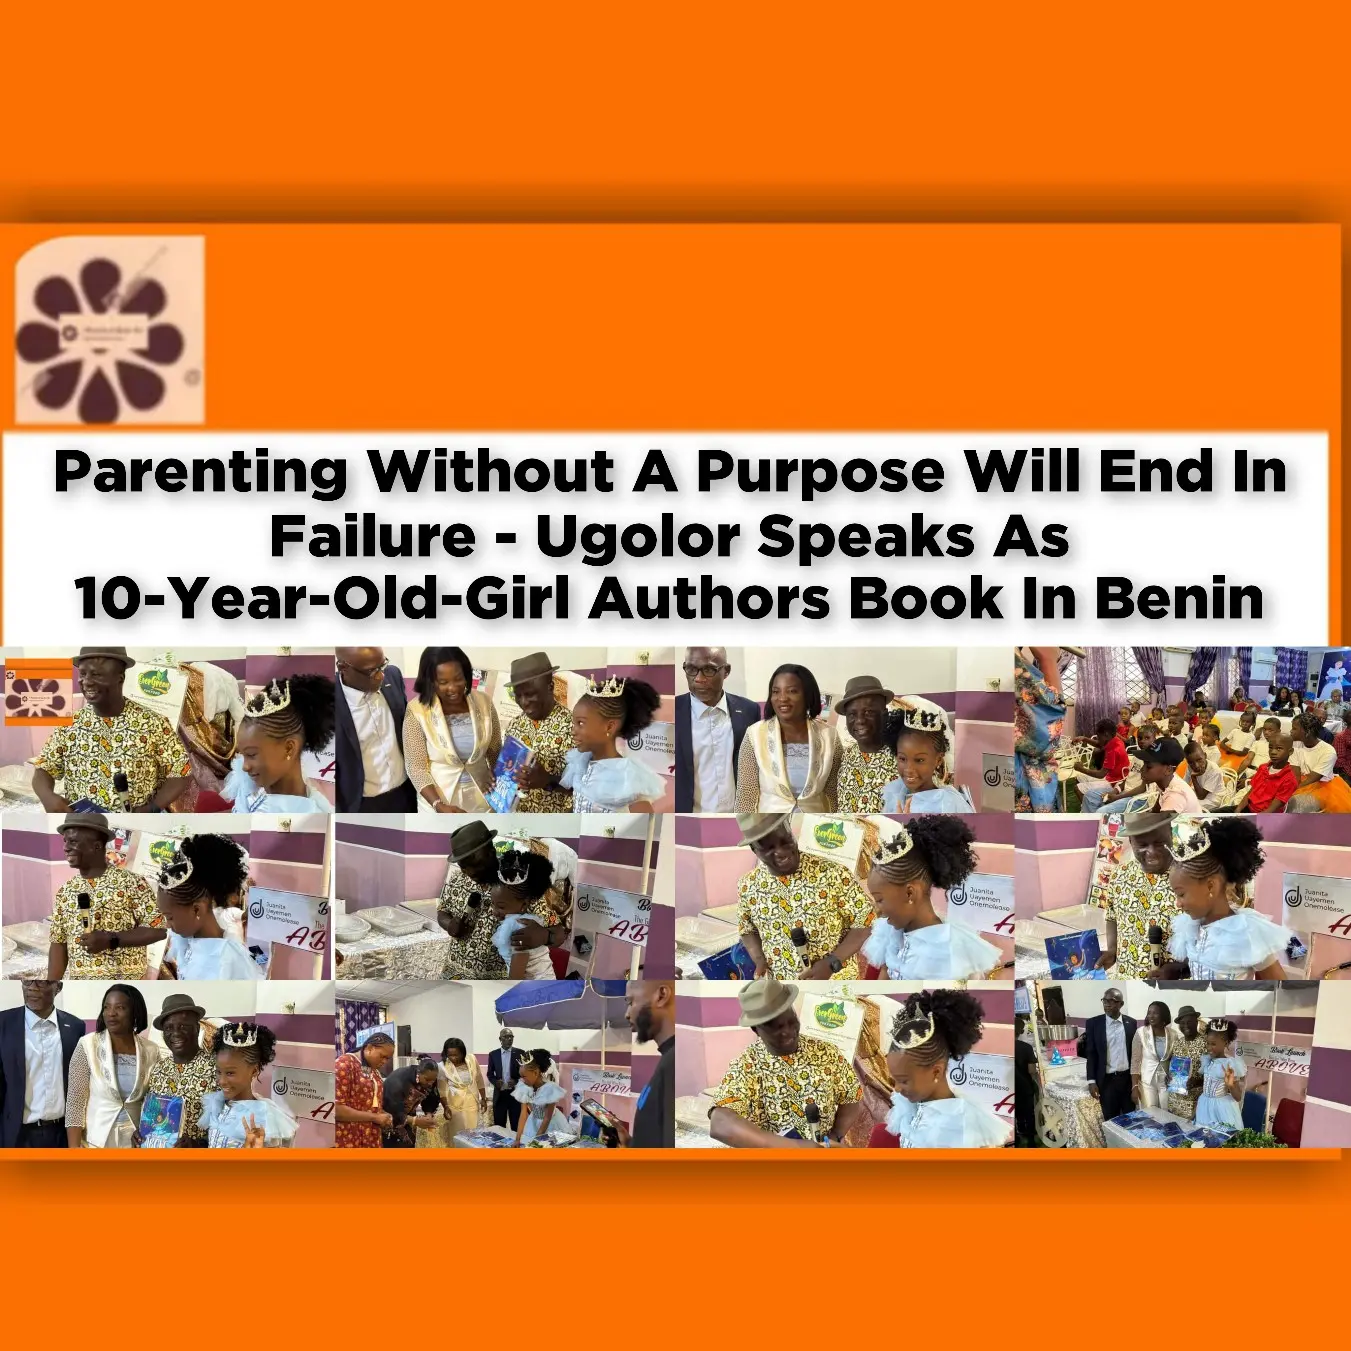 Parenting Without A Purpose Will End In Failure - Ugolor Speaks As 10-Year-Old-Girl Authors Book In Benin ~ OsazuwaAkonedo #herdsmen